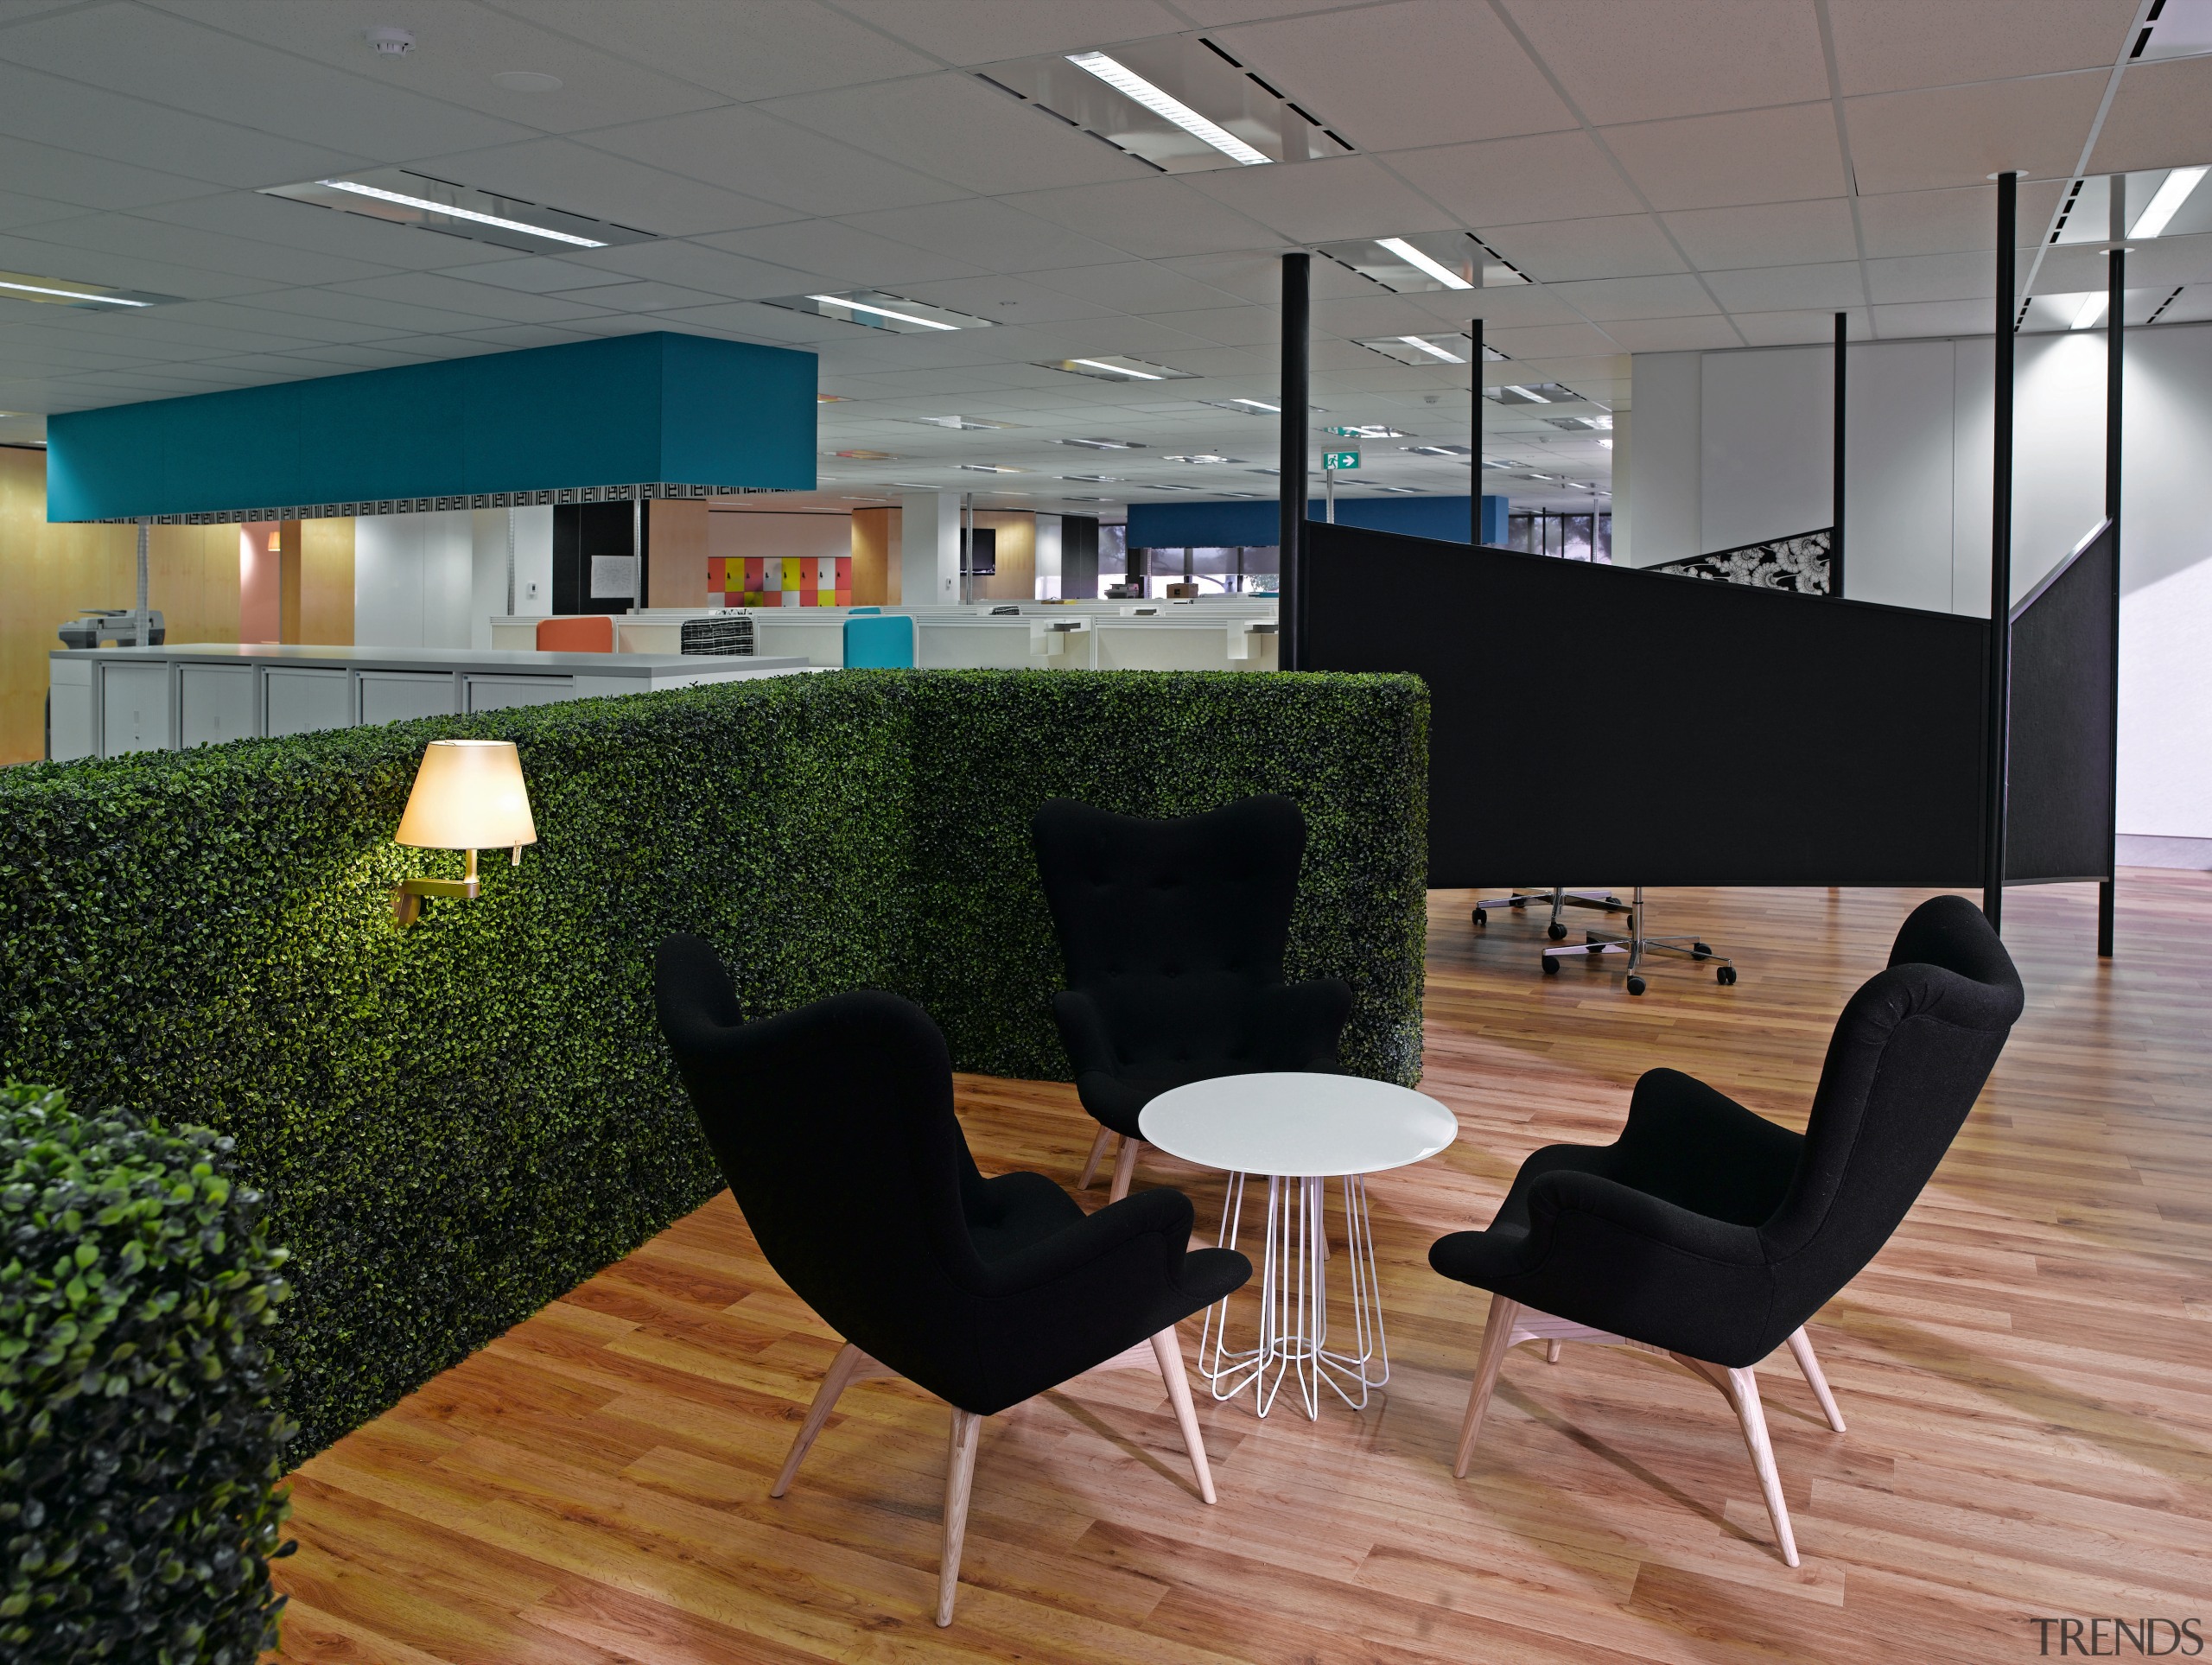 Image of the Westpac Epping Office which underwent architecture, chair, floor, furniture, interior design, lobby, office, waiting room, gray, black